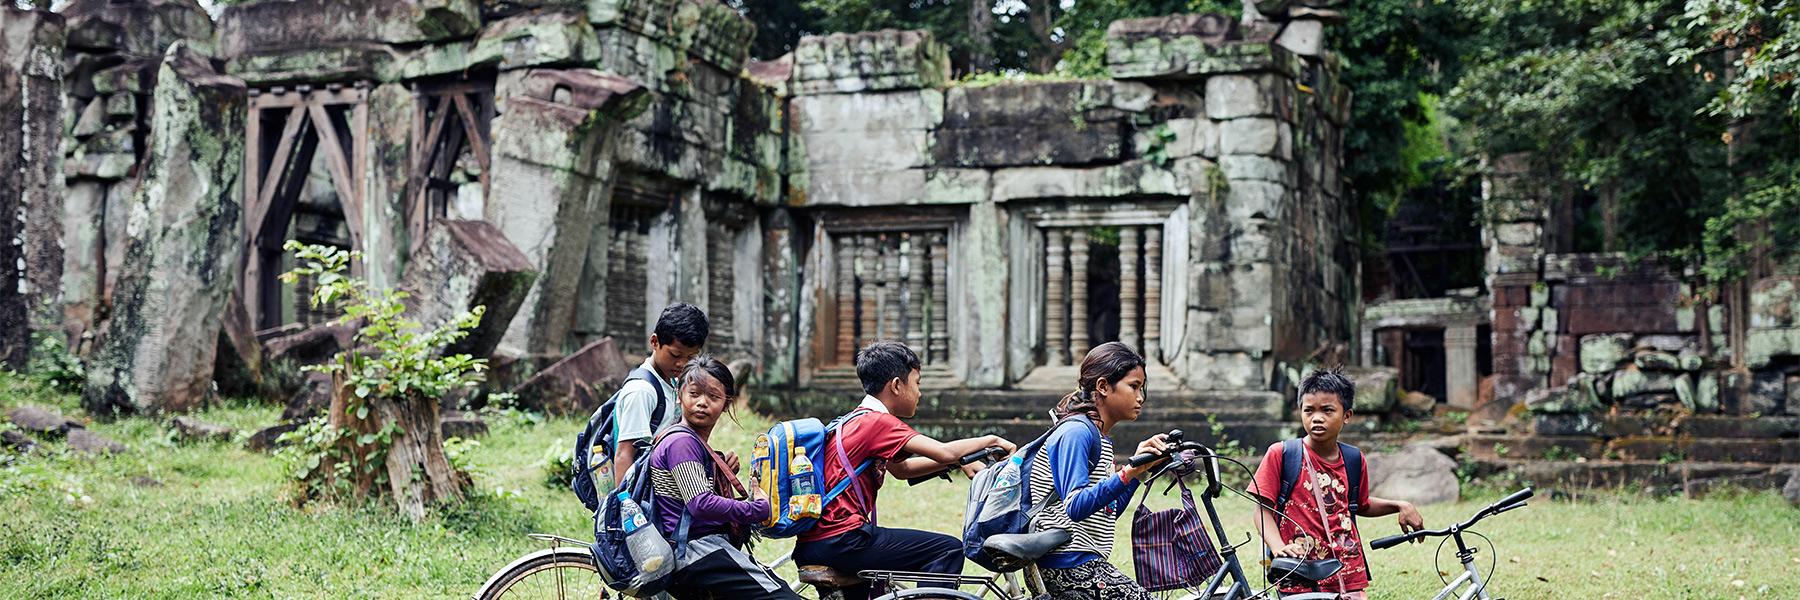 Why Visit The Temples Of Angkor?